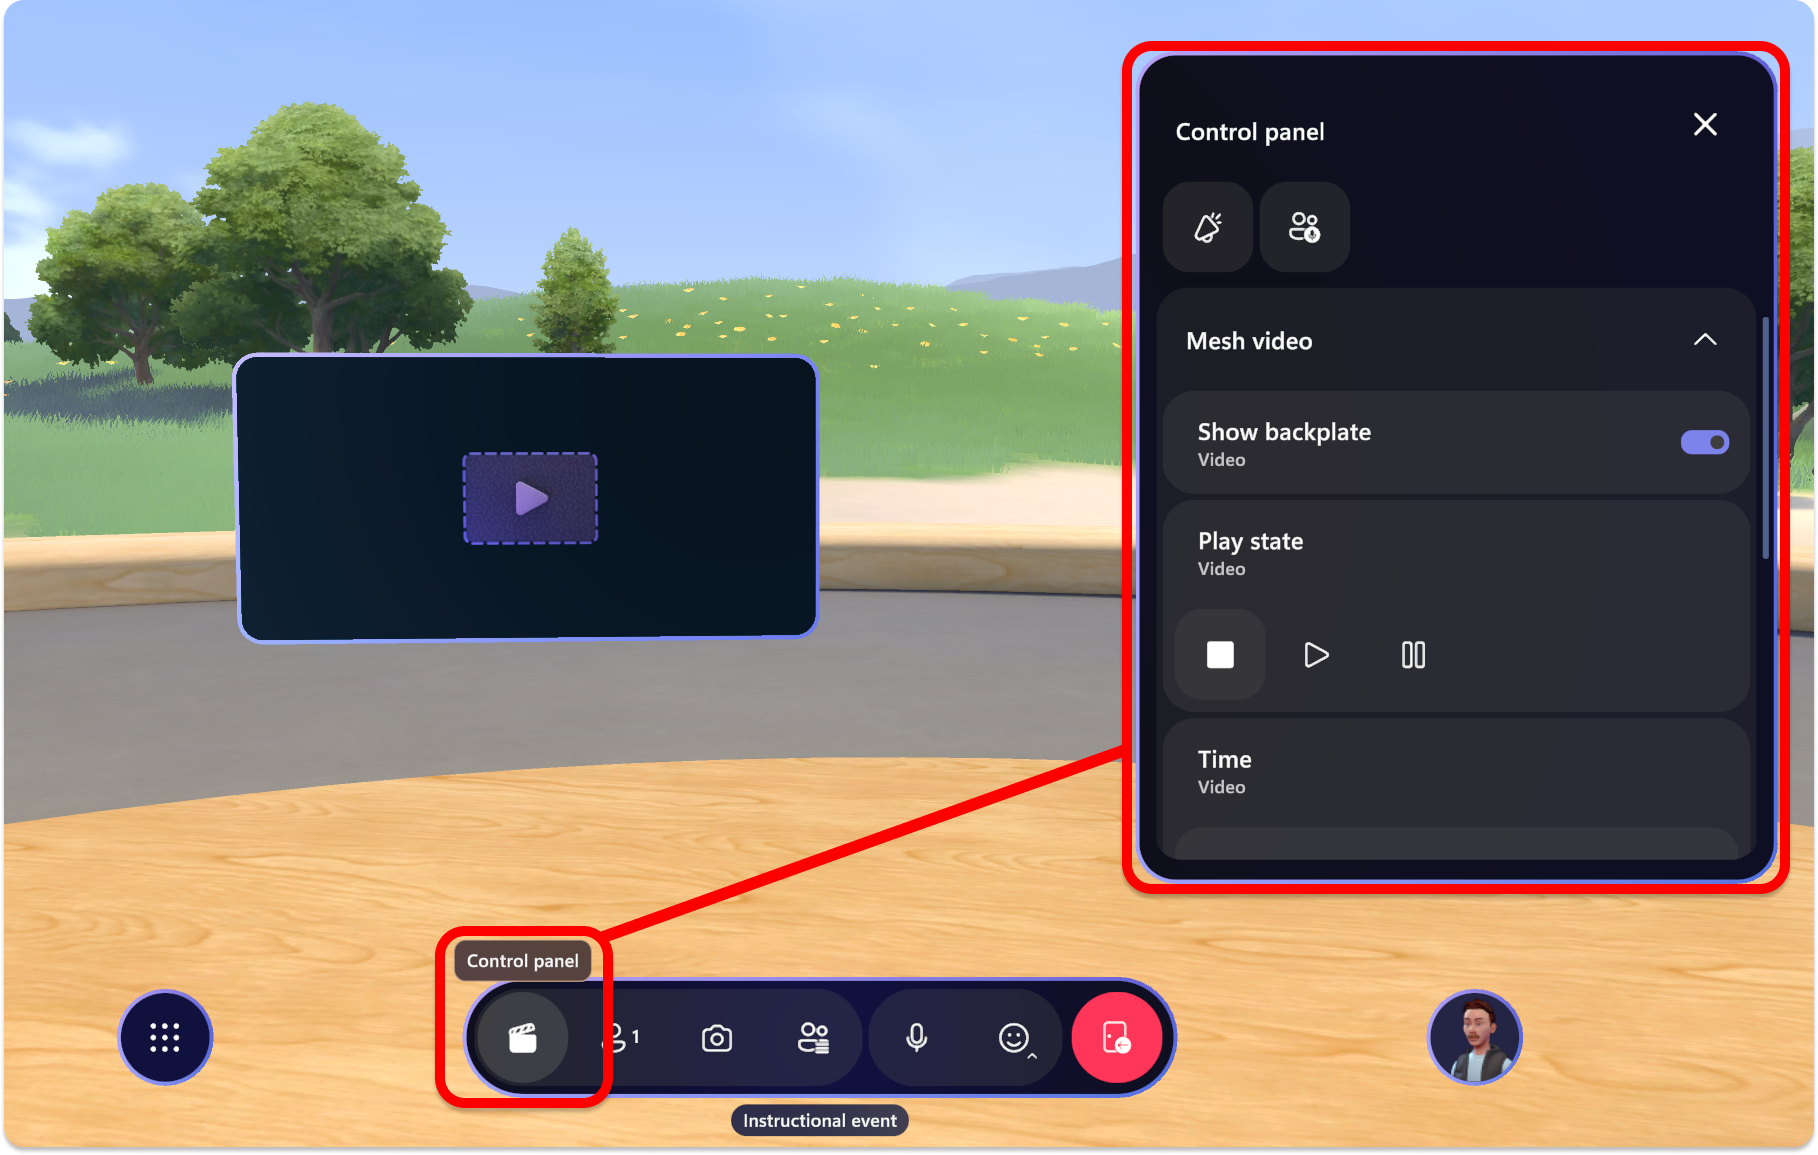 Screenshot of Mesh app showing Control panel button and panel